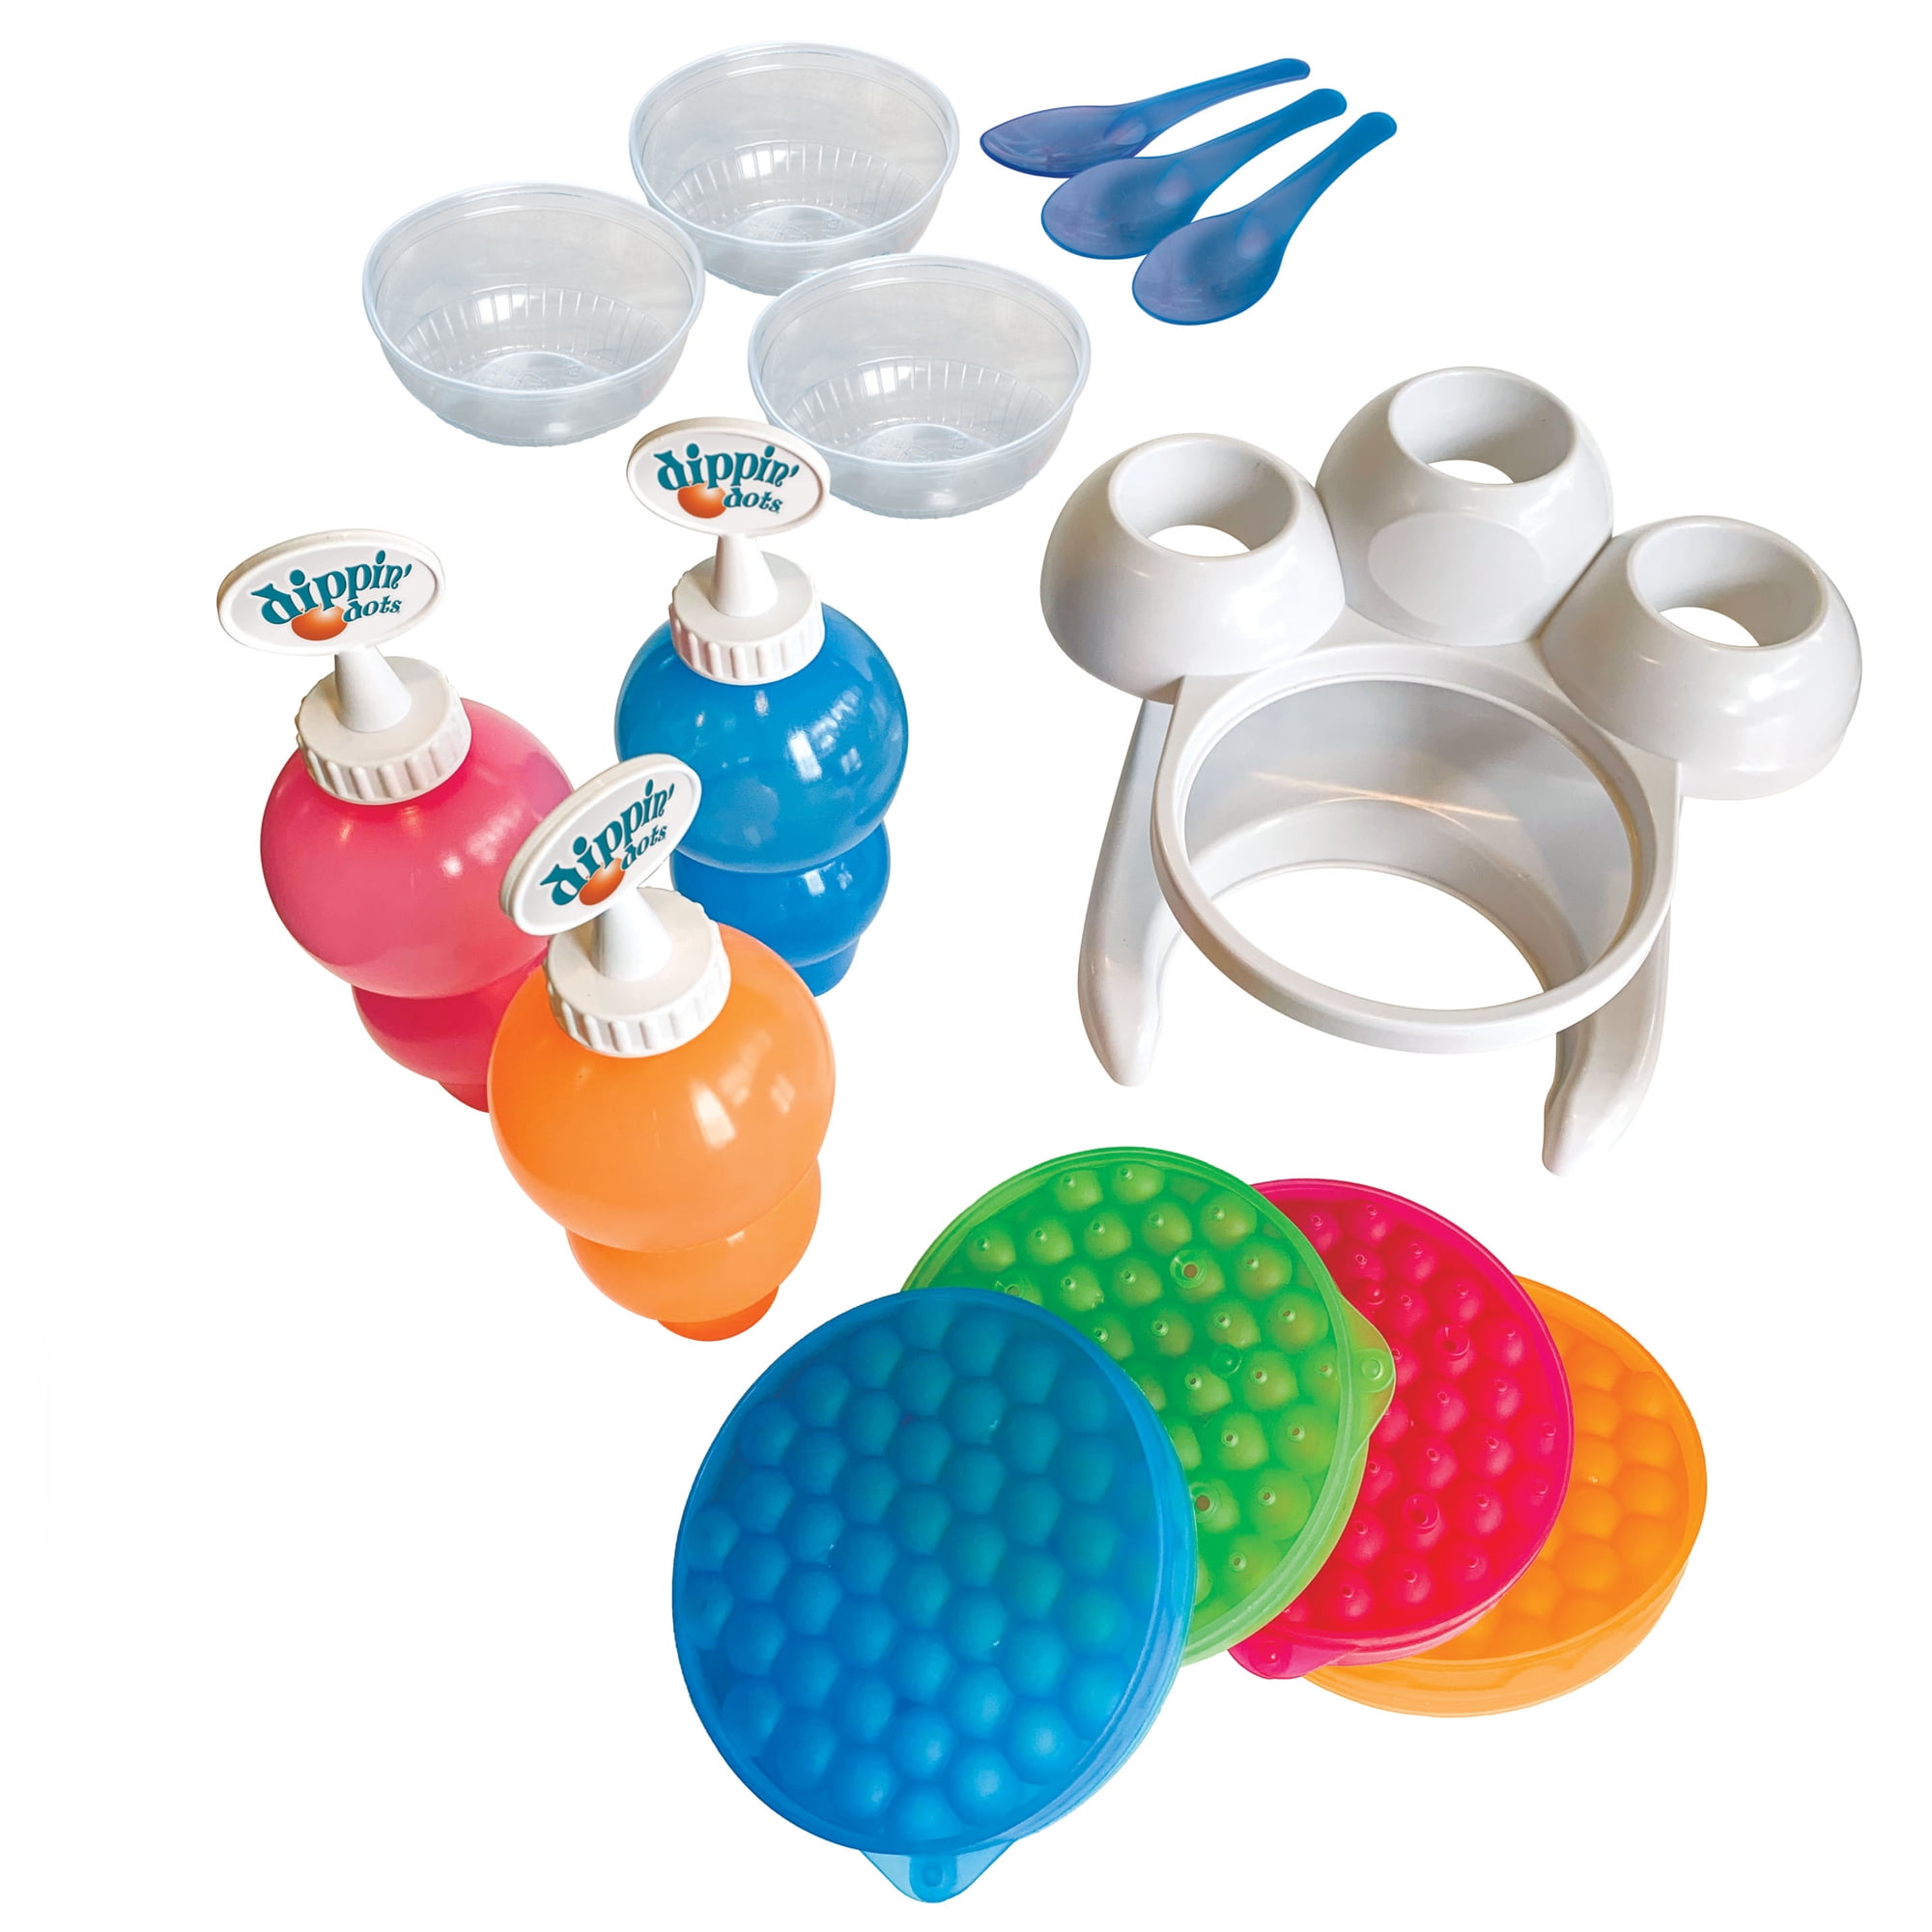 Toys R US: Dippin Dots Frozen Dot Maker $4.98 and 70% off select